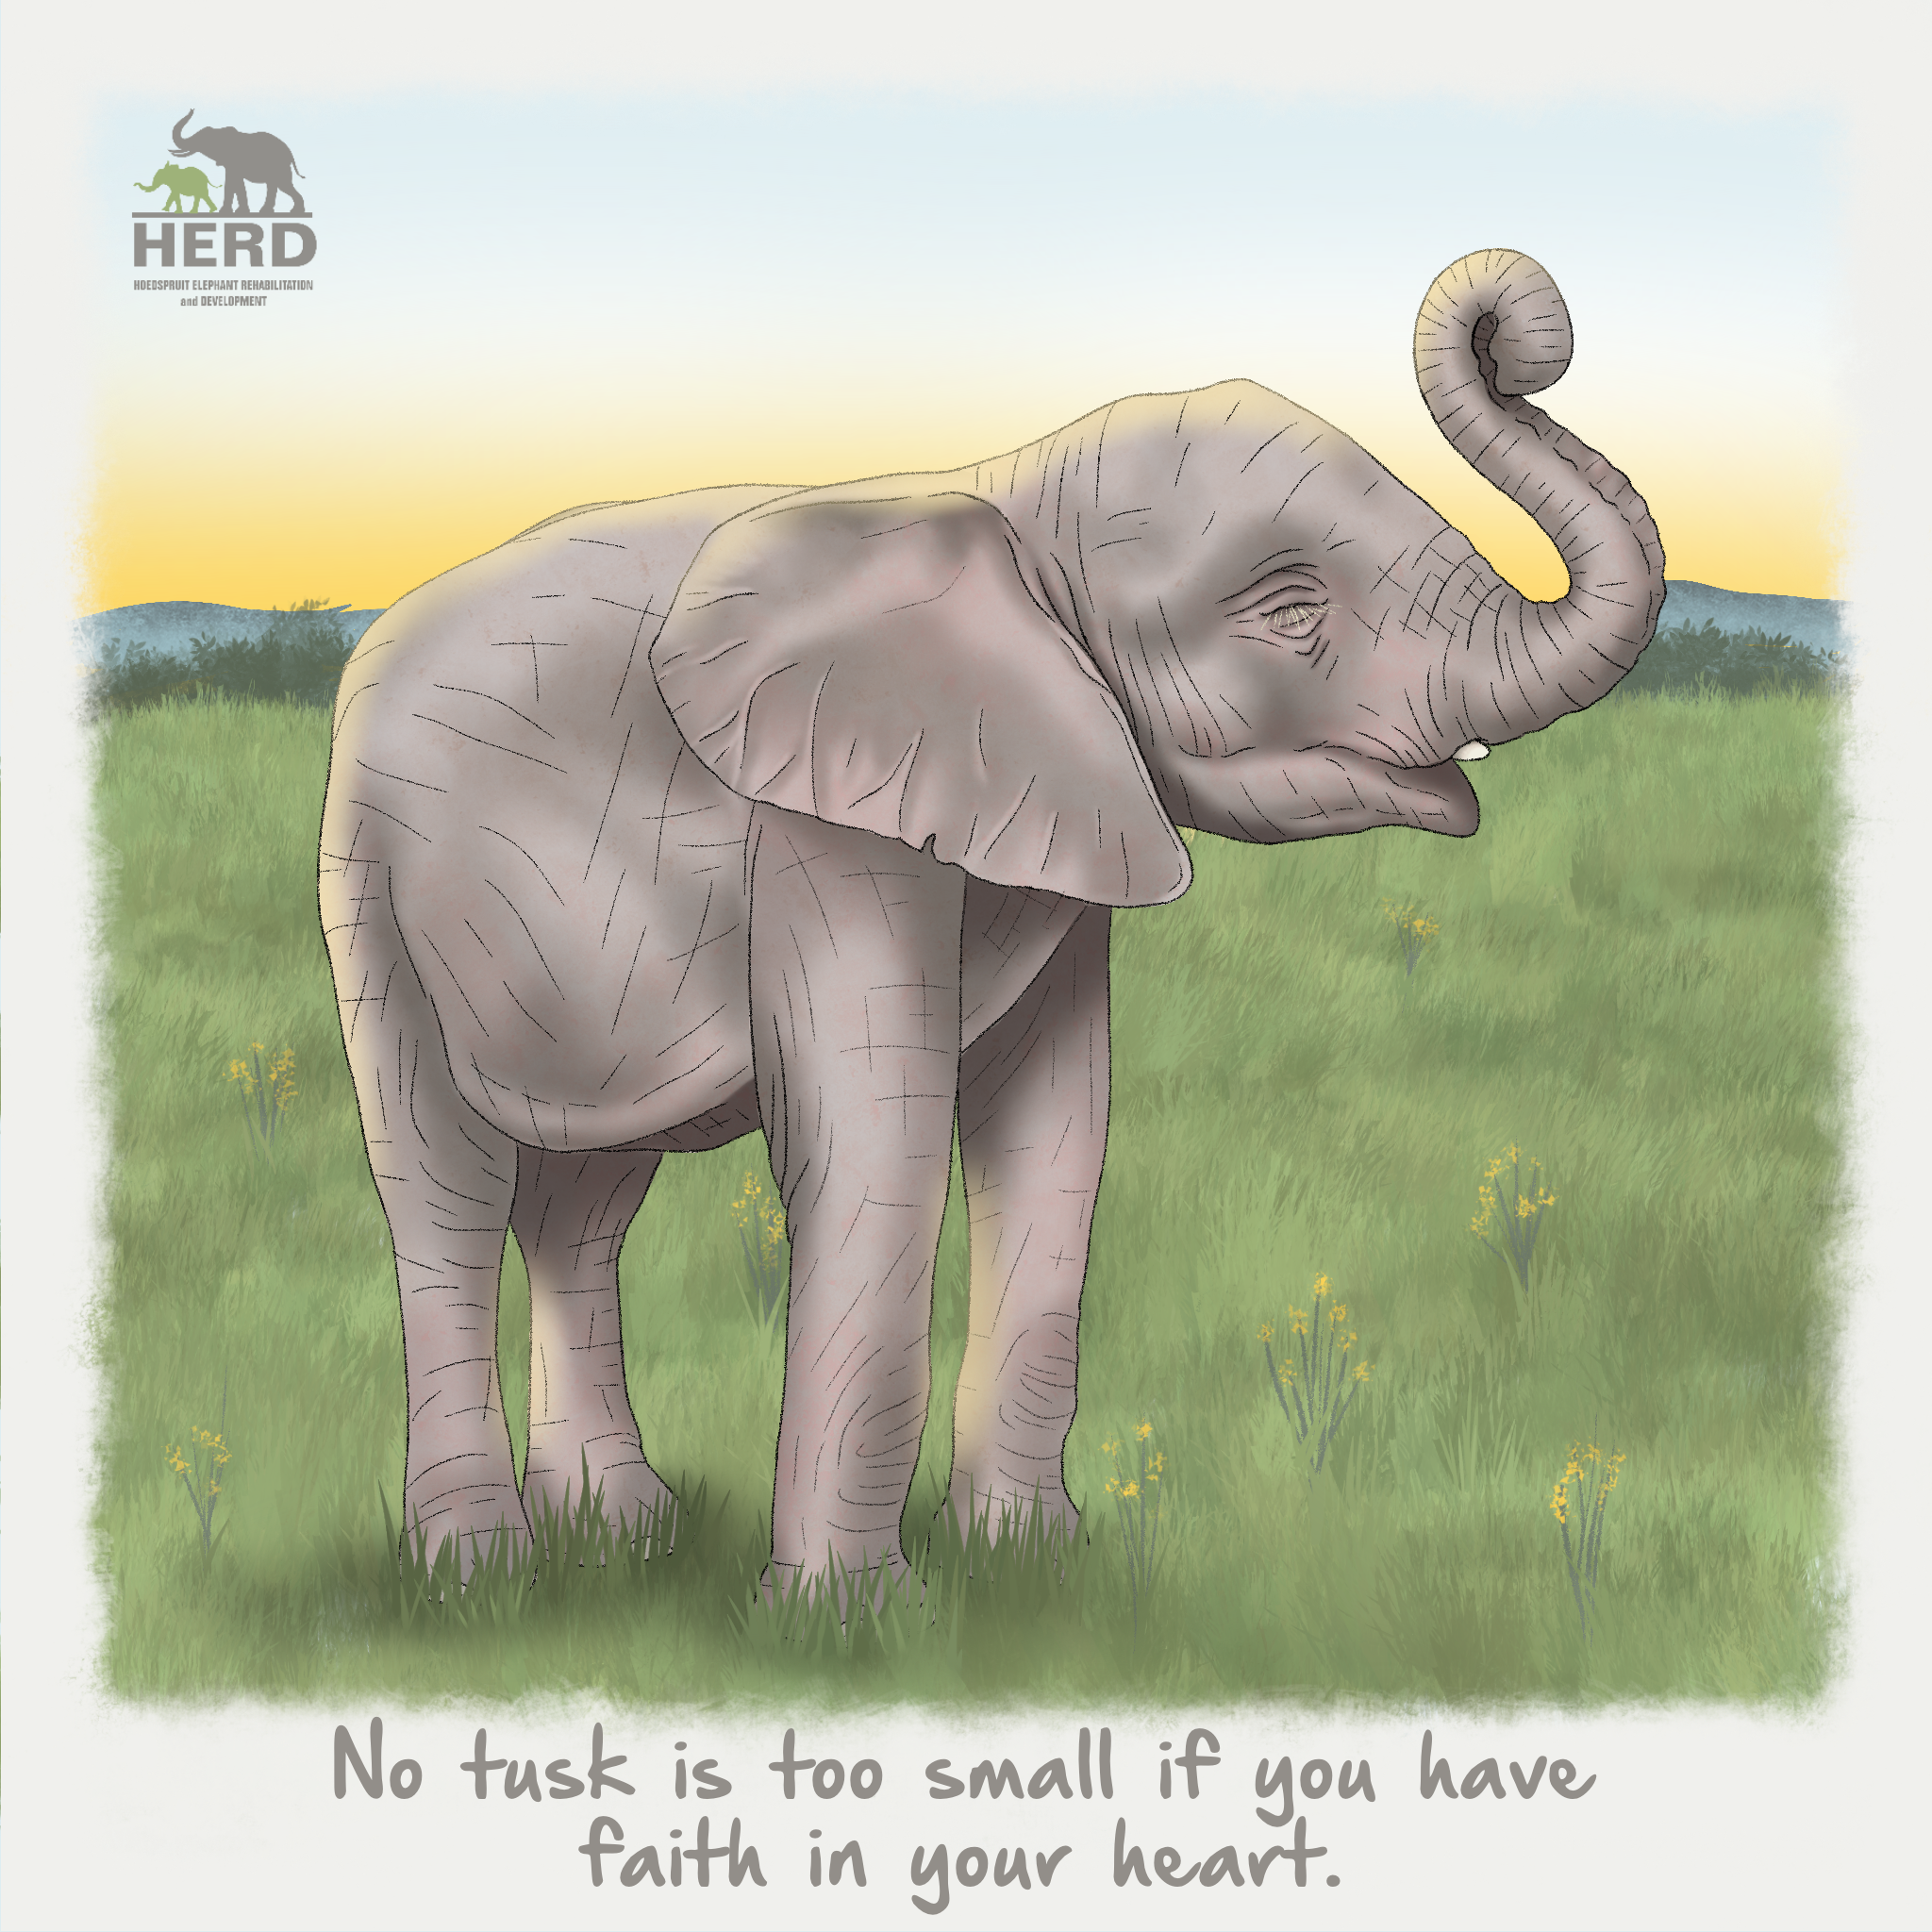 Wisdom 19 – No tusk is too small if you have faith in your heart.